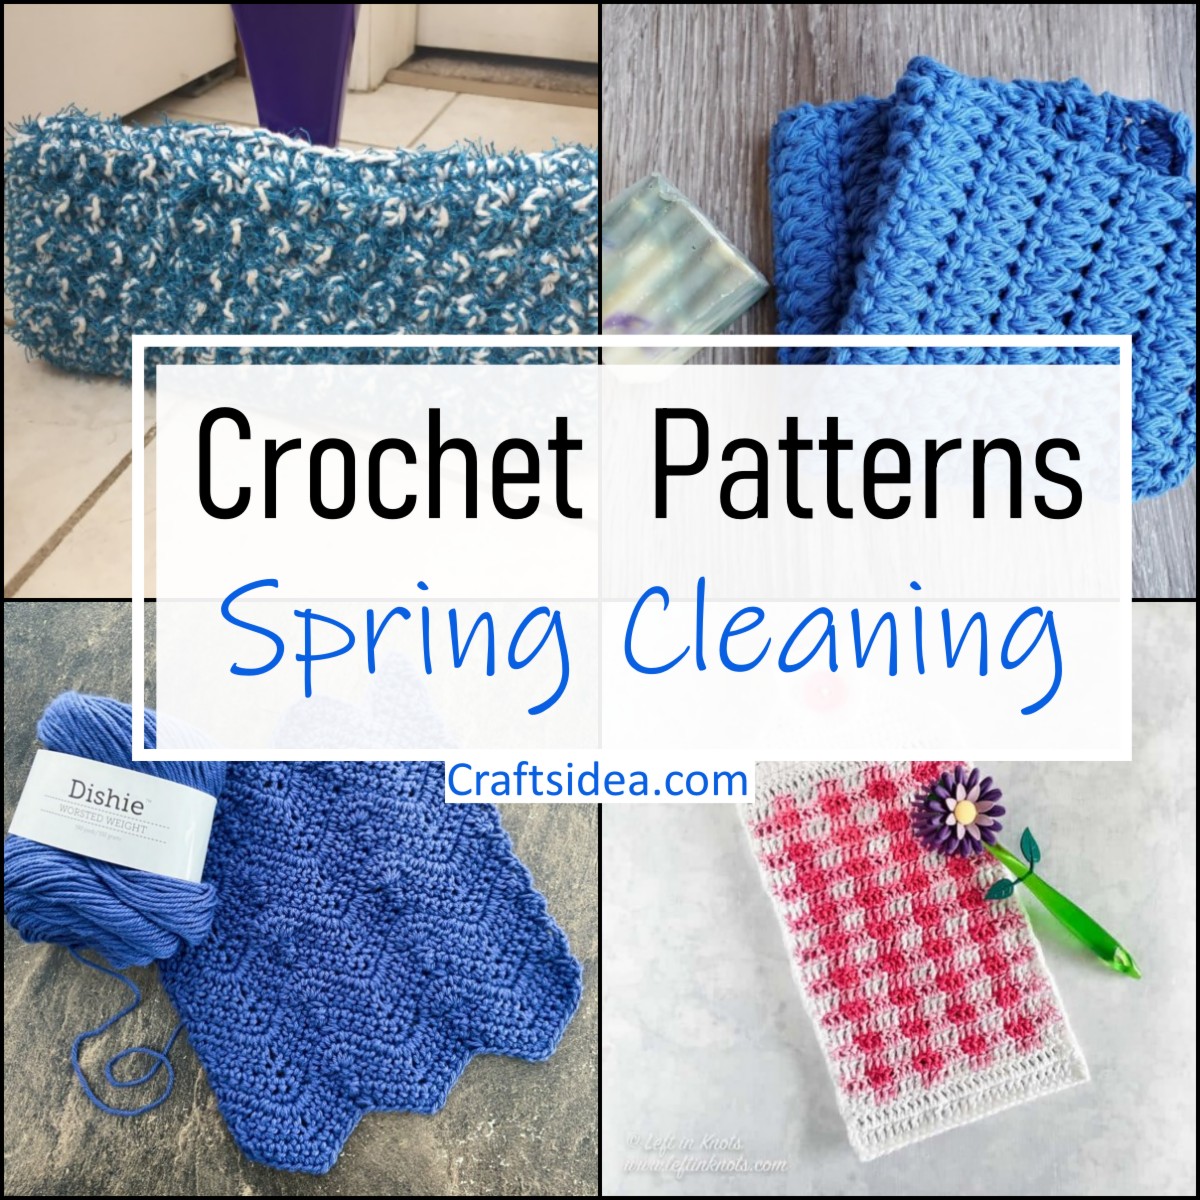 Crochet Spring Cleaning Patterns